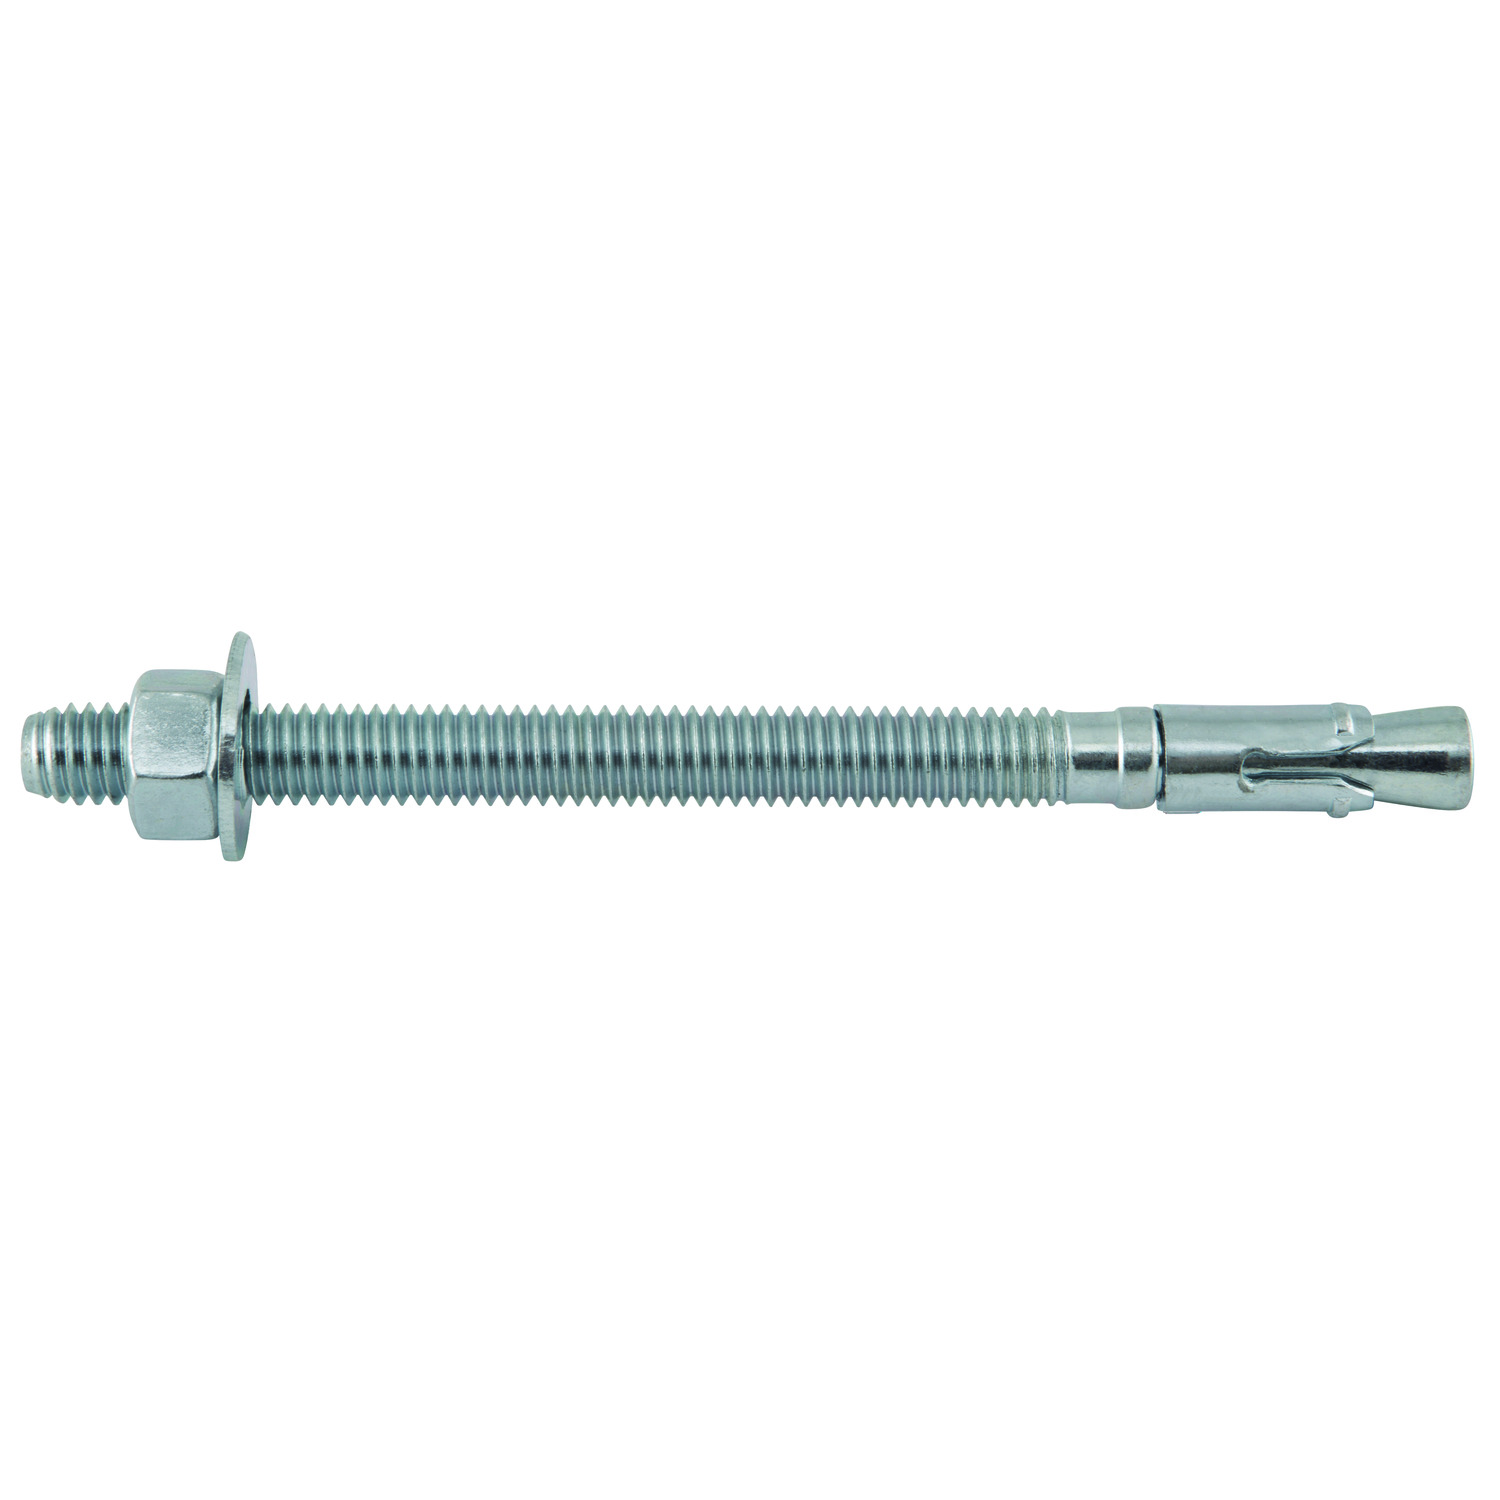 DeWALT® Power-Stud®+ Powers® 7416SD1-PWR Expansion Wedge Anchor, 3/8 in Dia, 5 in OAL, 3-5/8 in L Thread, Carbon Steel, Zinc Plated